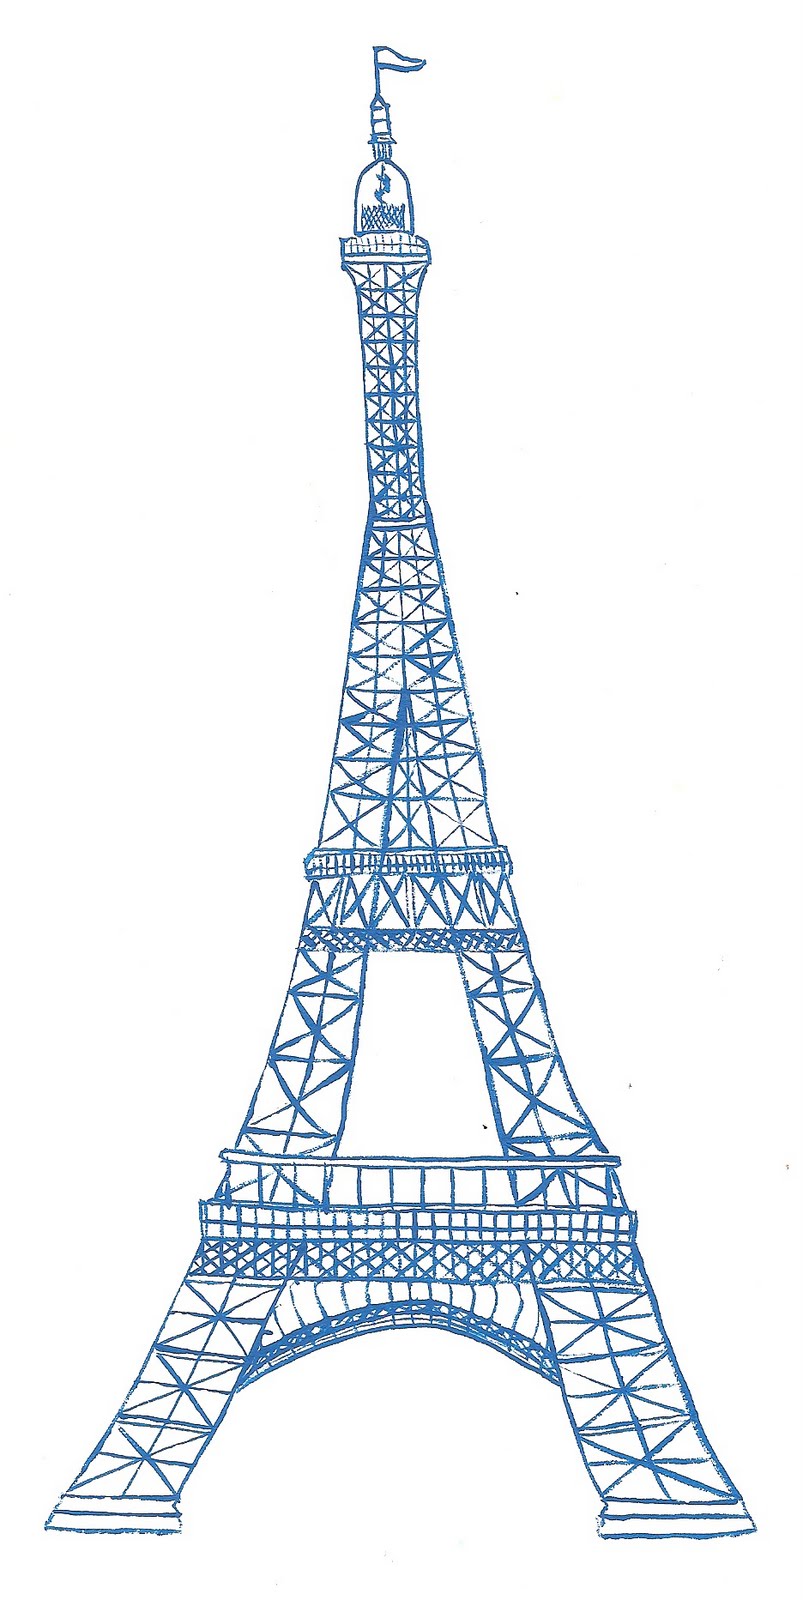 12 Eiffel Tower Cartoon Images Free Cliparts That You Can Download To    